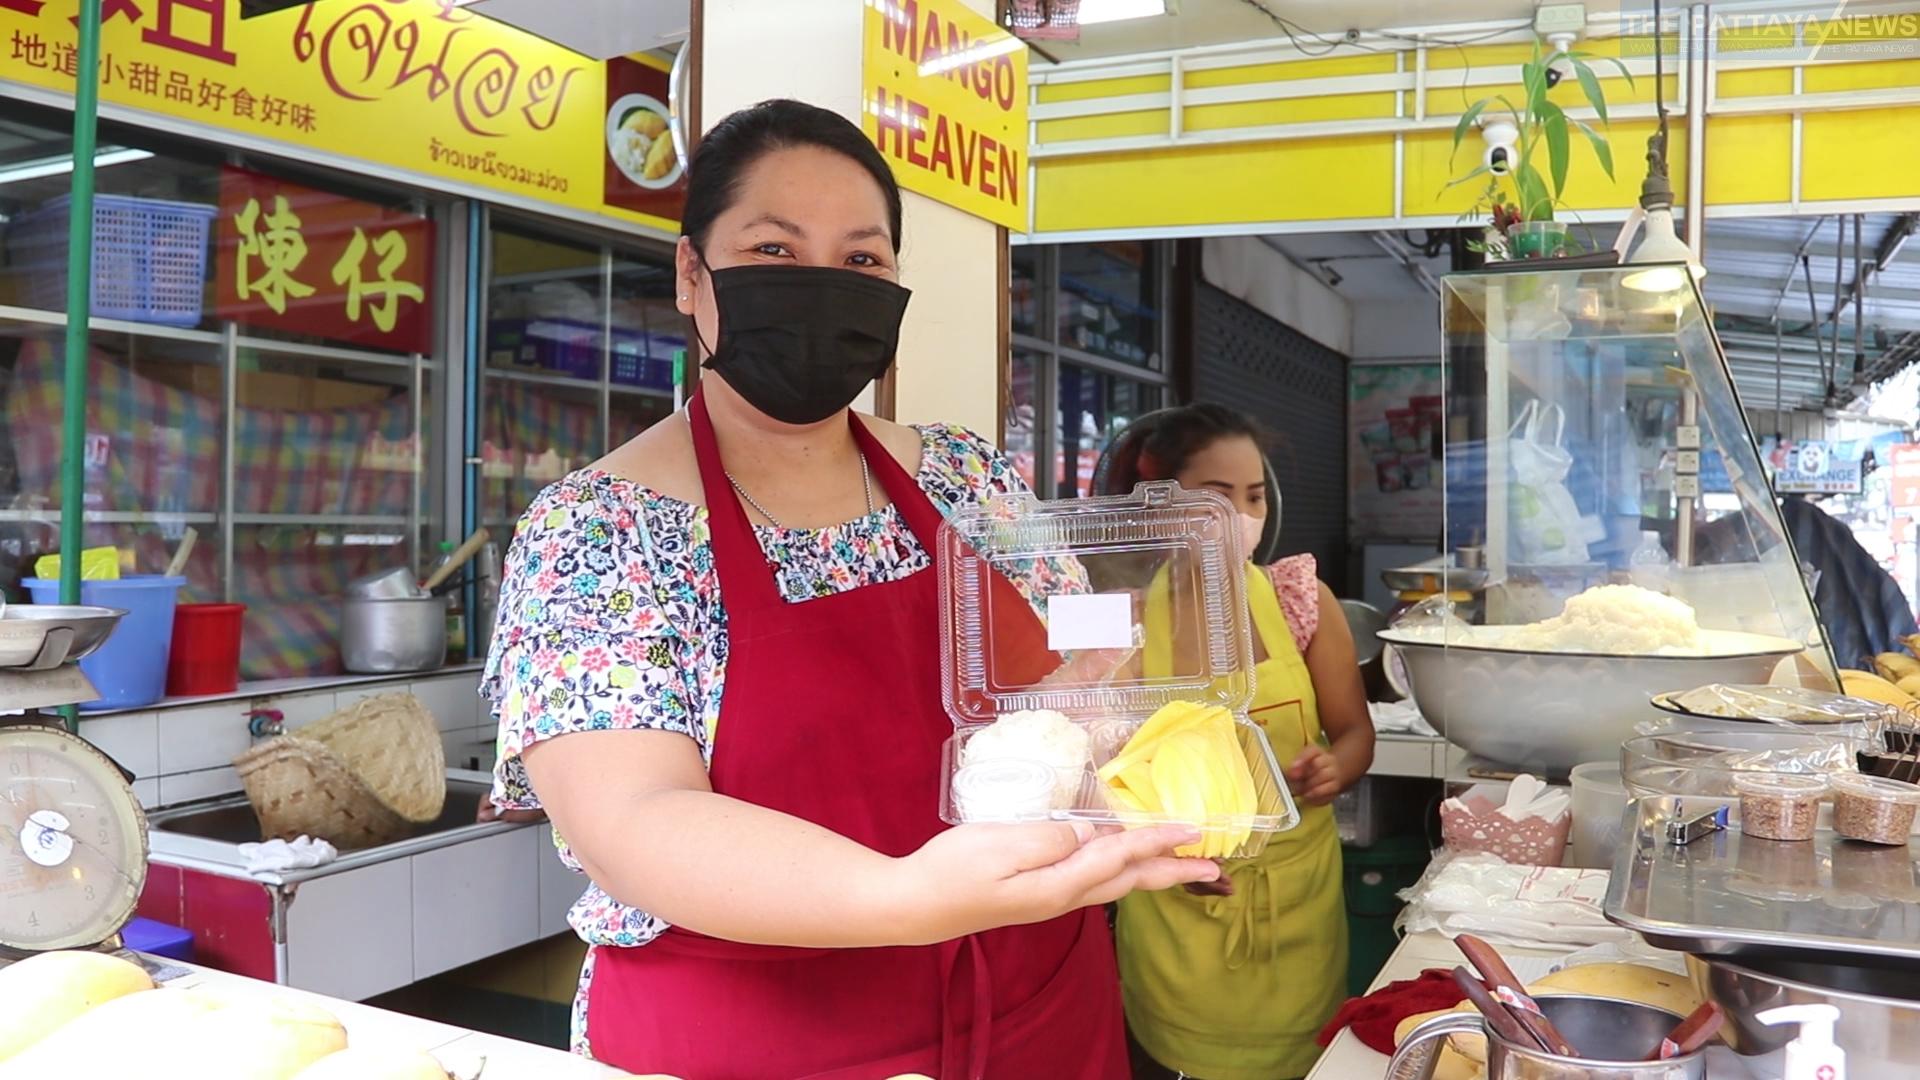 Mango sticky rice doubles in sales in Pattaya after Thai rapper Milli’s performance on Coachella stage